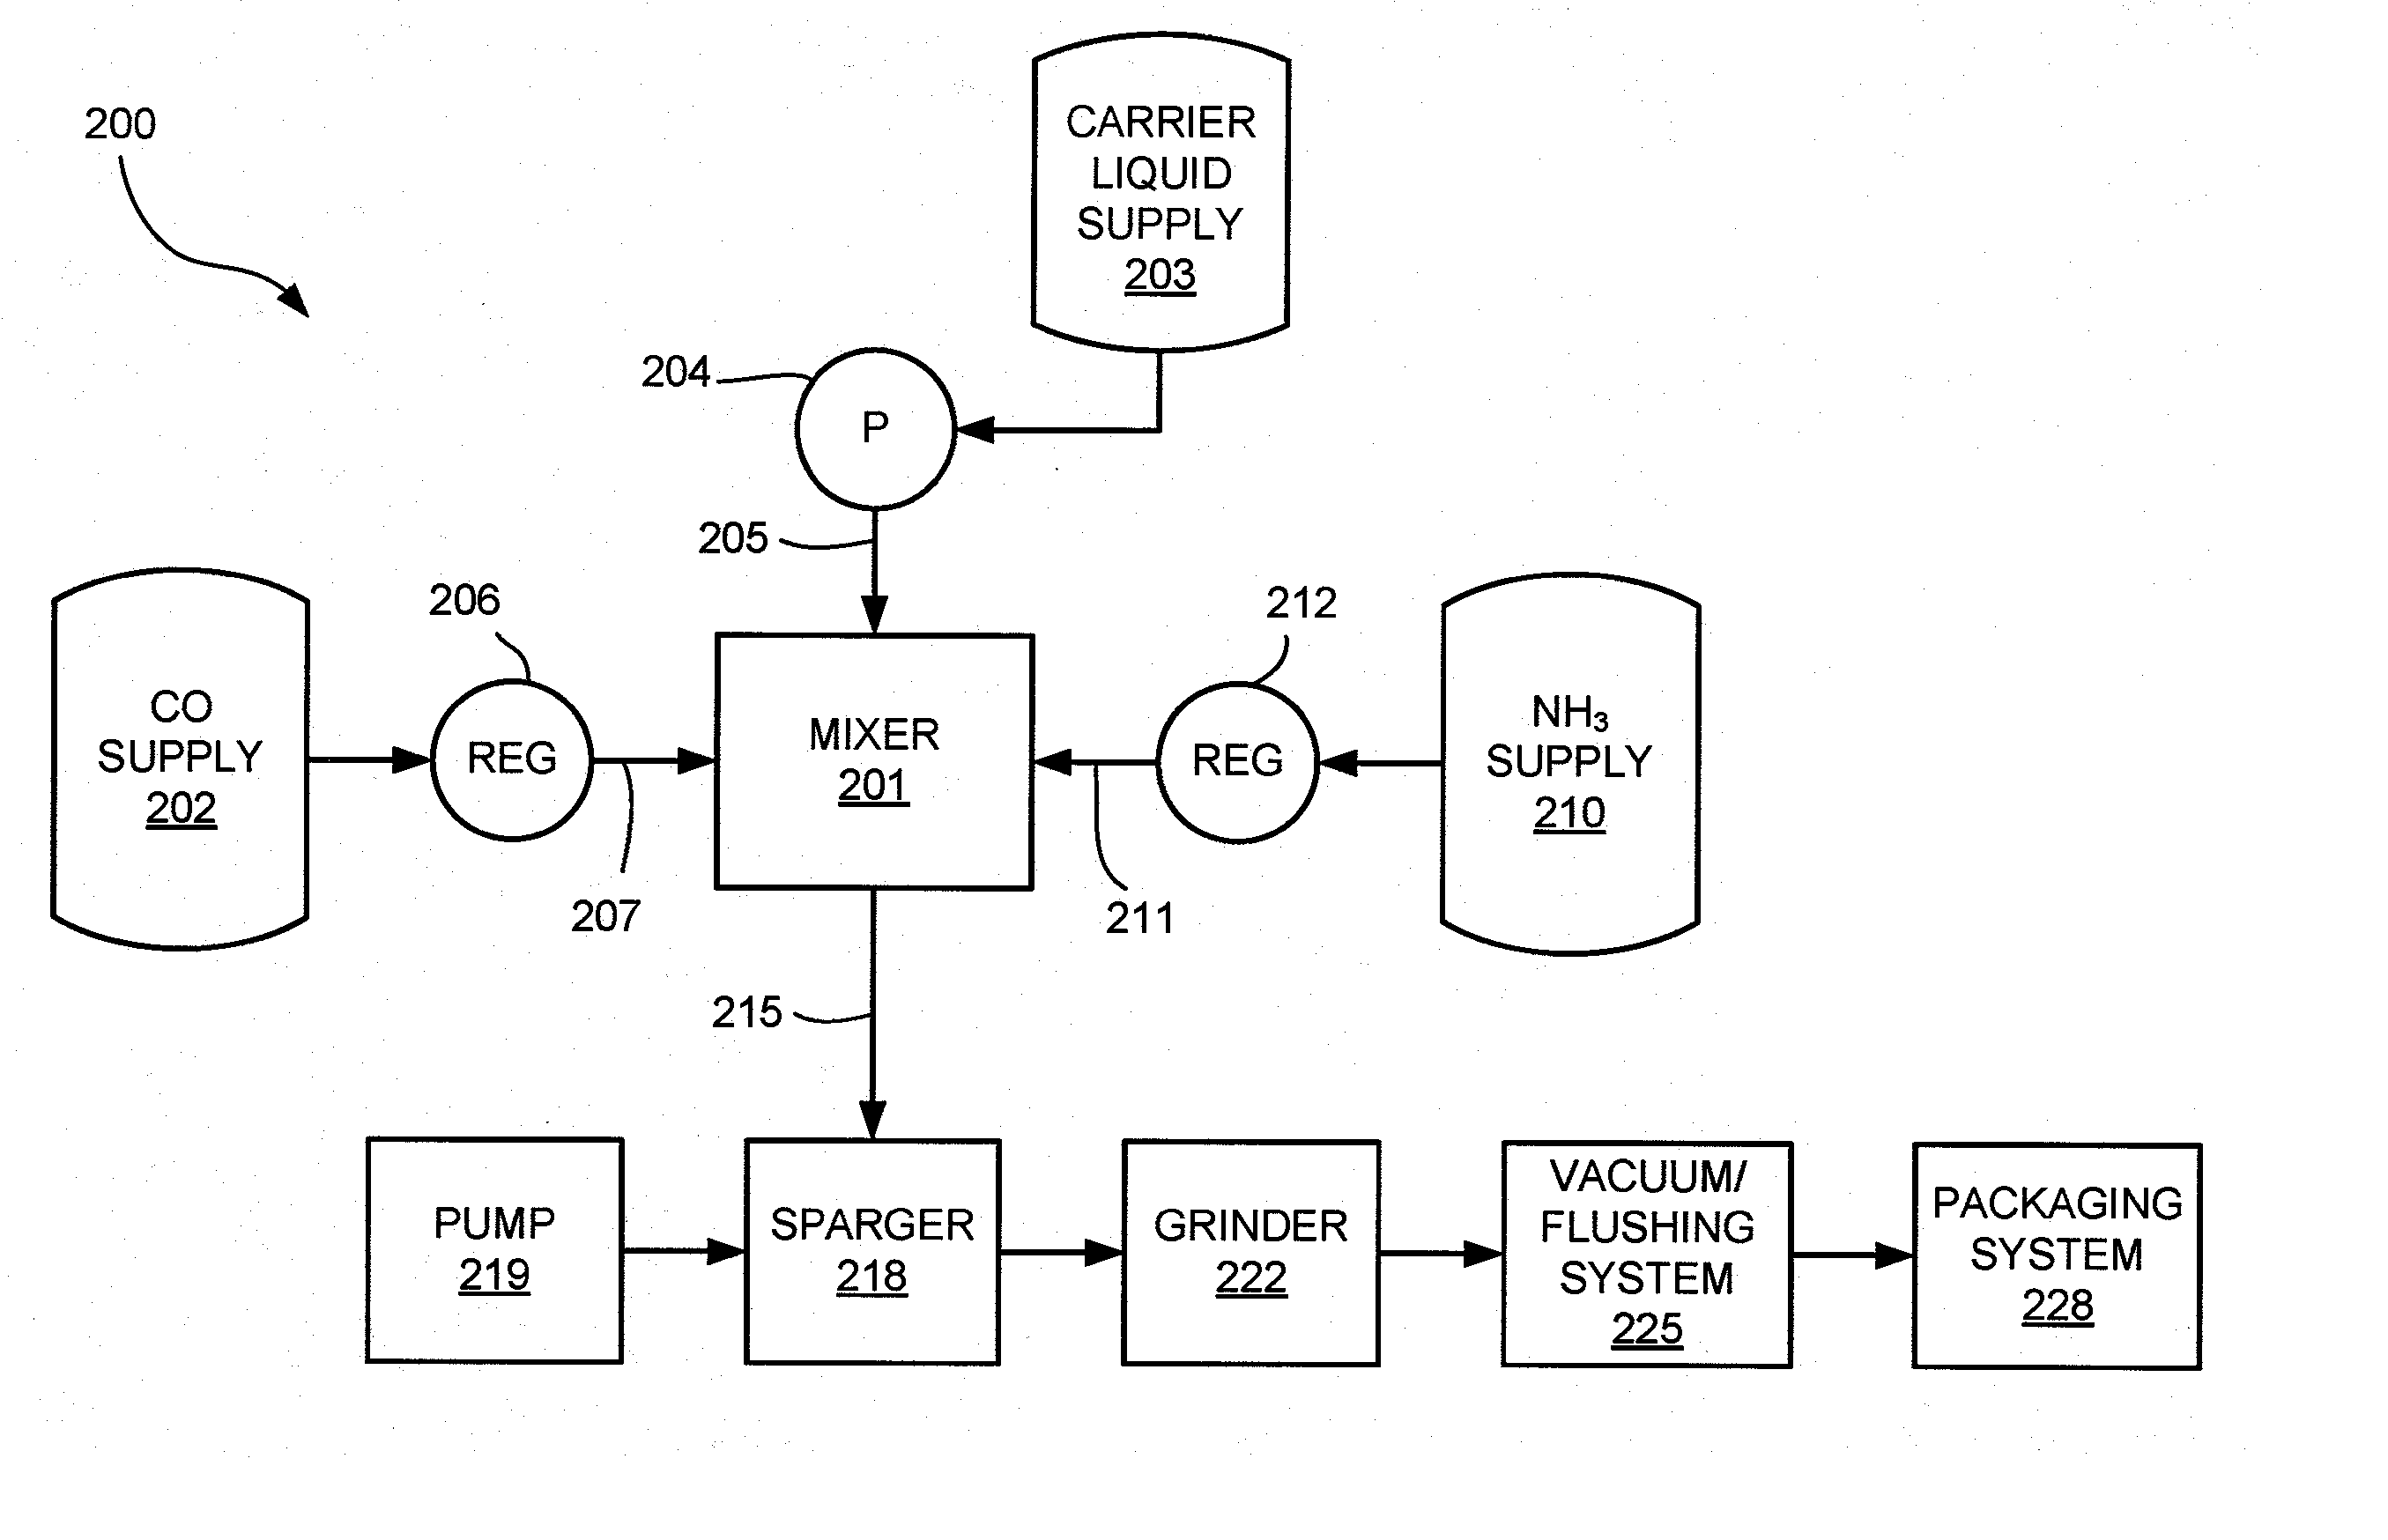 Method for Applying Carbon Monoxide to Meat Products